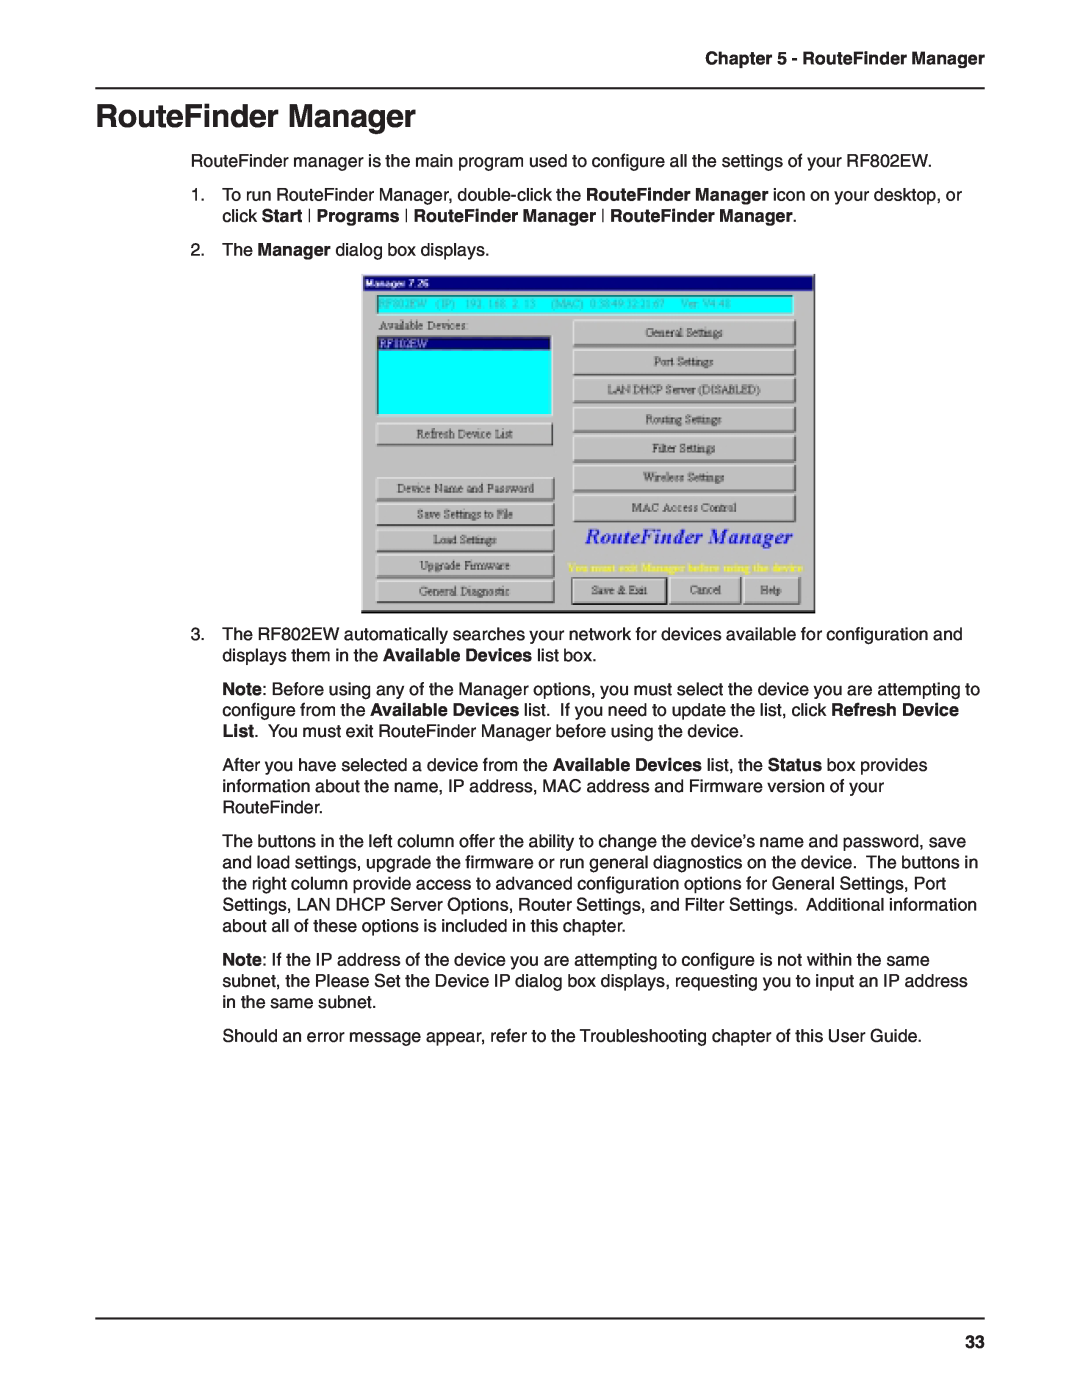 Multi-Tech Systems RF802EW manual RouteFinder Manager 